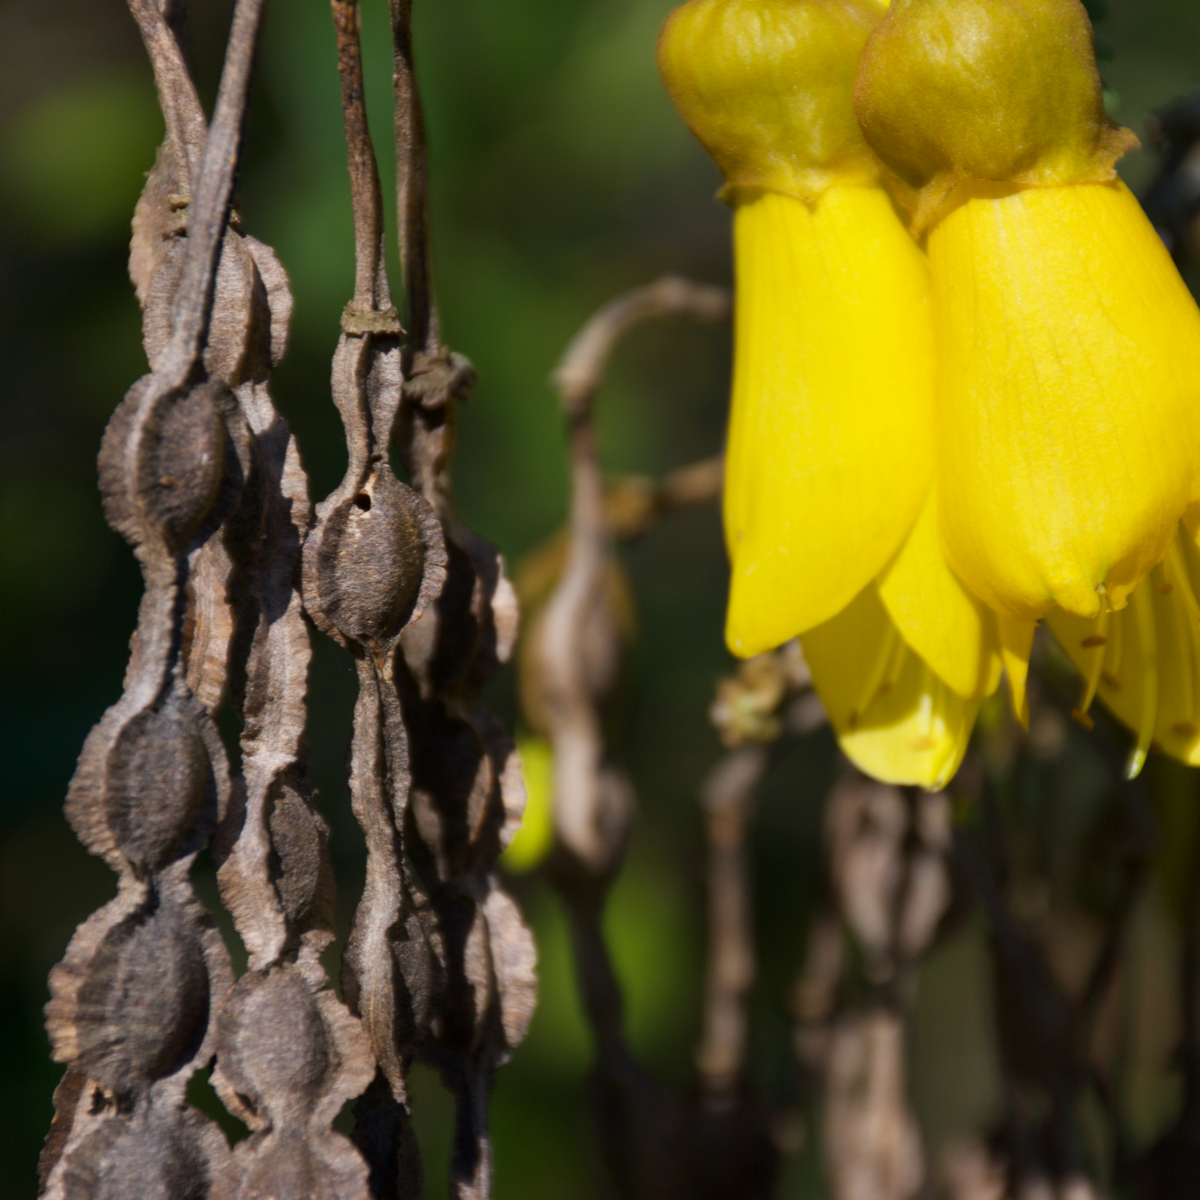 Kowhai seed pods and flowers